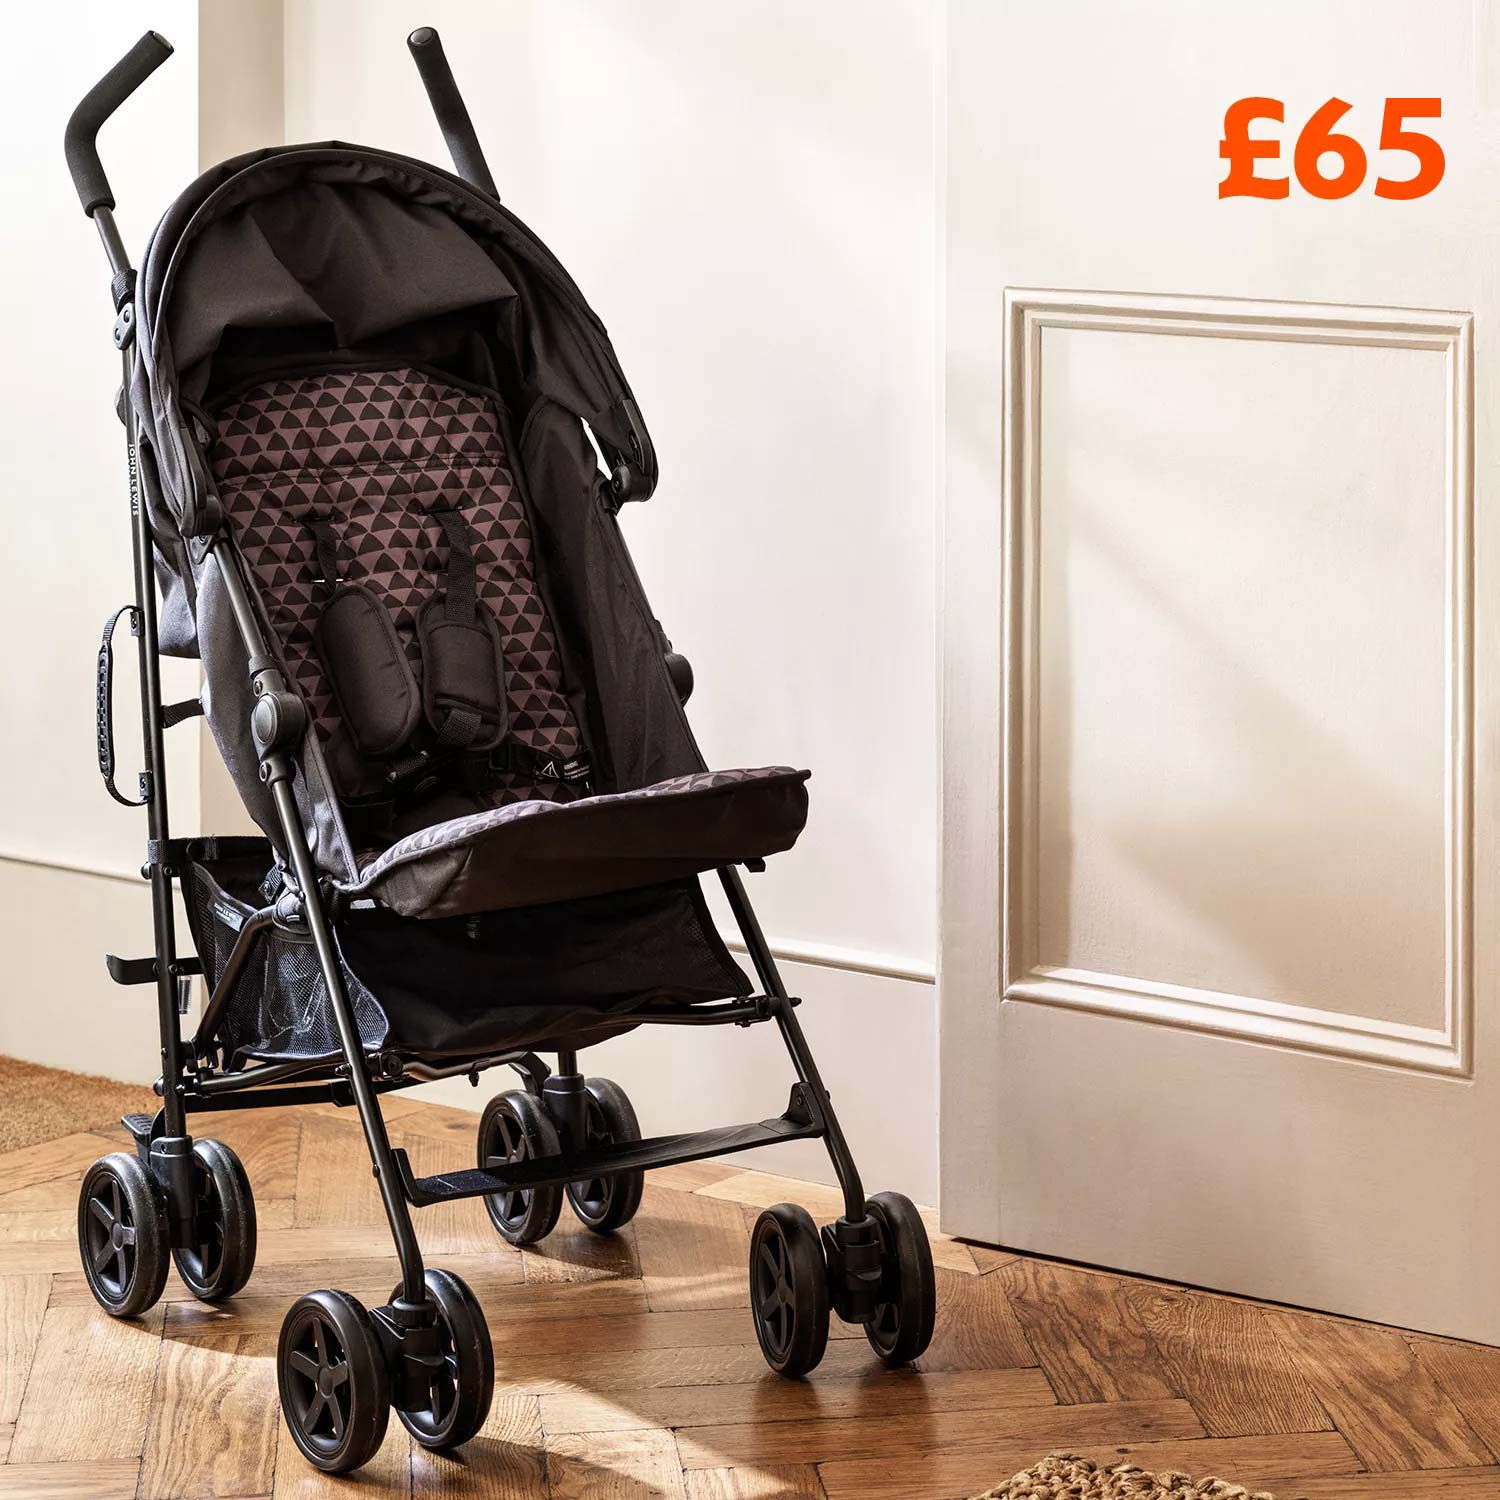 ANYDAY - Baby Essentials- Prams from £65